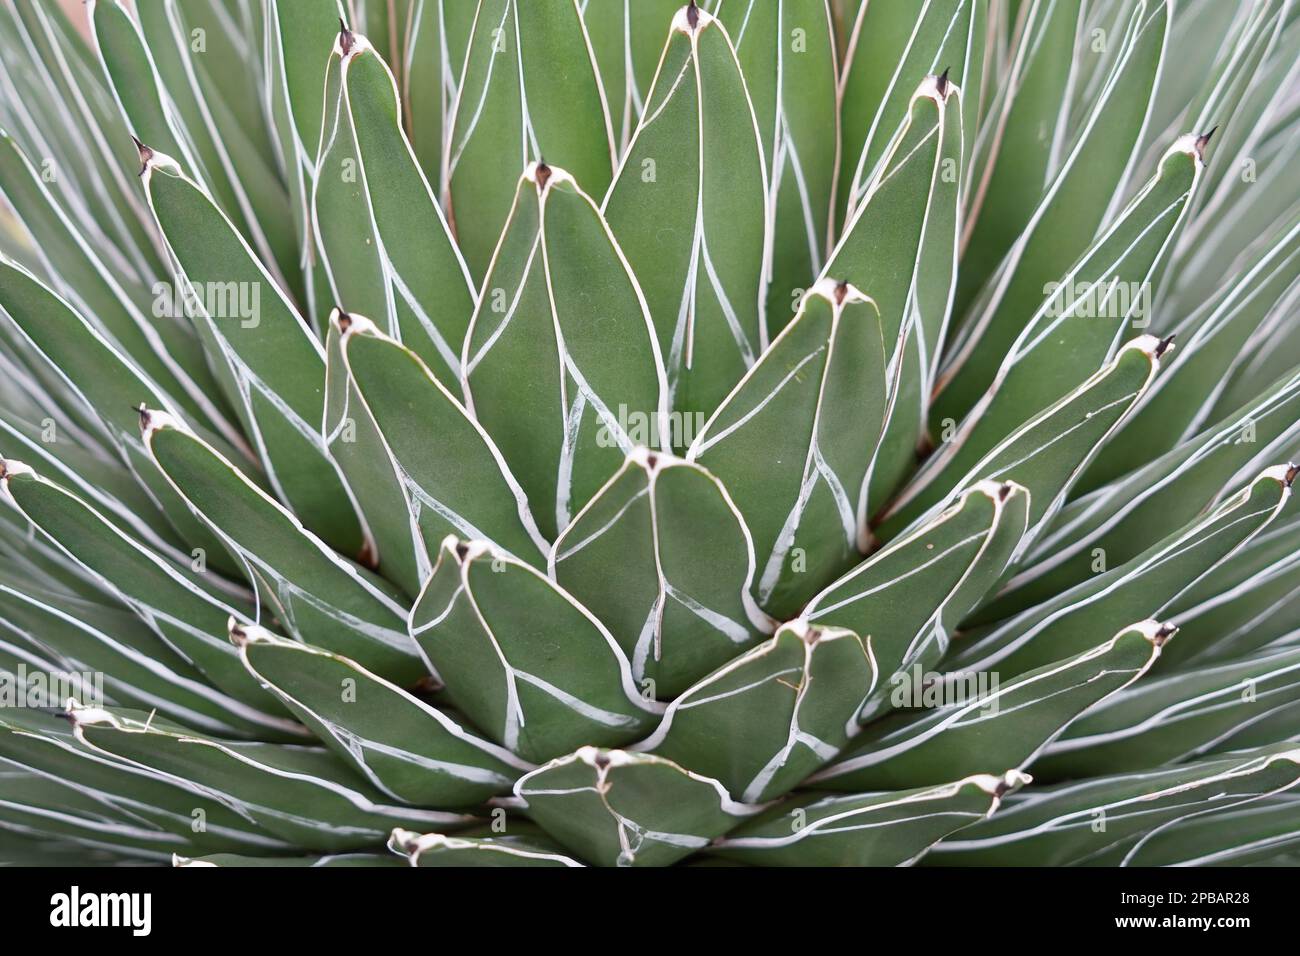 Cutout of agave plant, in Latin it is called Agave victoriae-regina. Its succulent leaves have typical thin white edge. Stock Photo